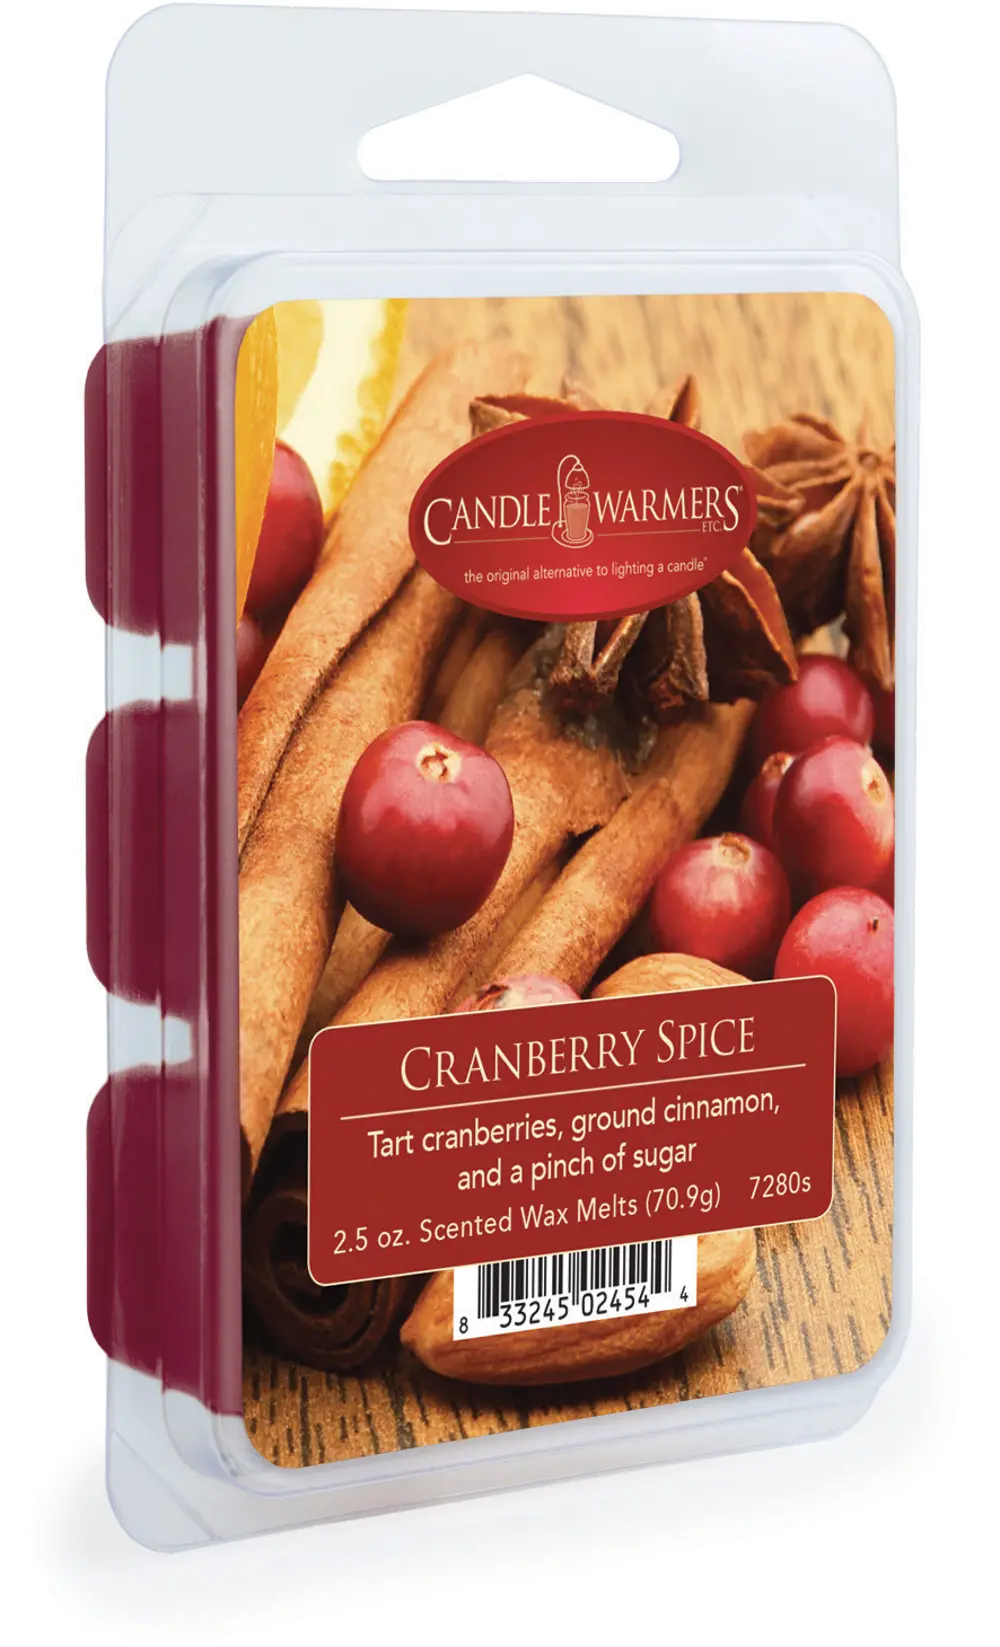 Cranberry Spice 2.5oz Wax Melt - Candle Warmers-1